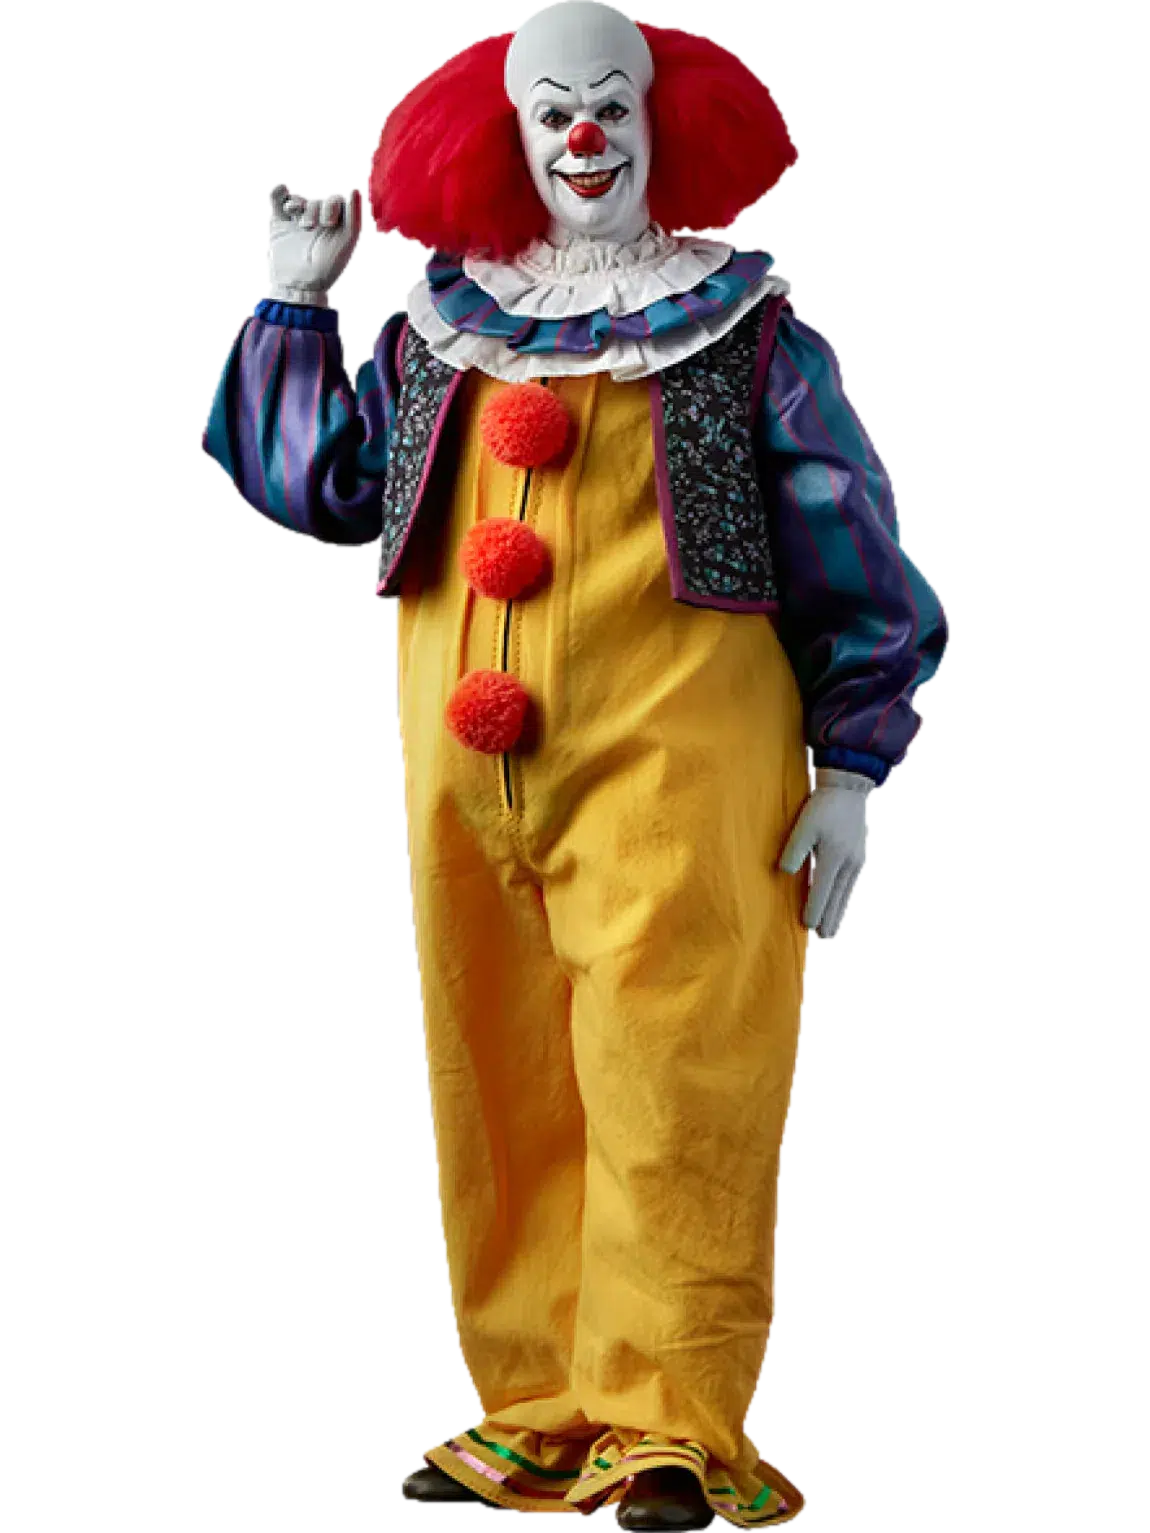 IT: Pennywise: 1990: Sixth Scale Figure Sideshow